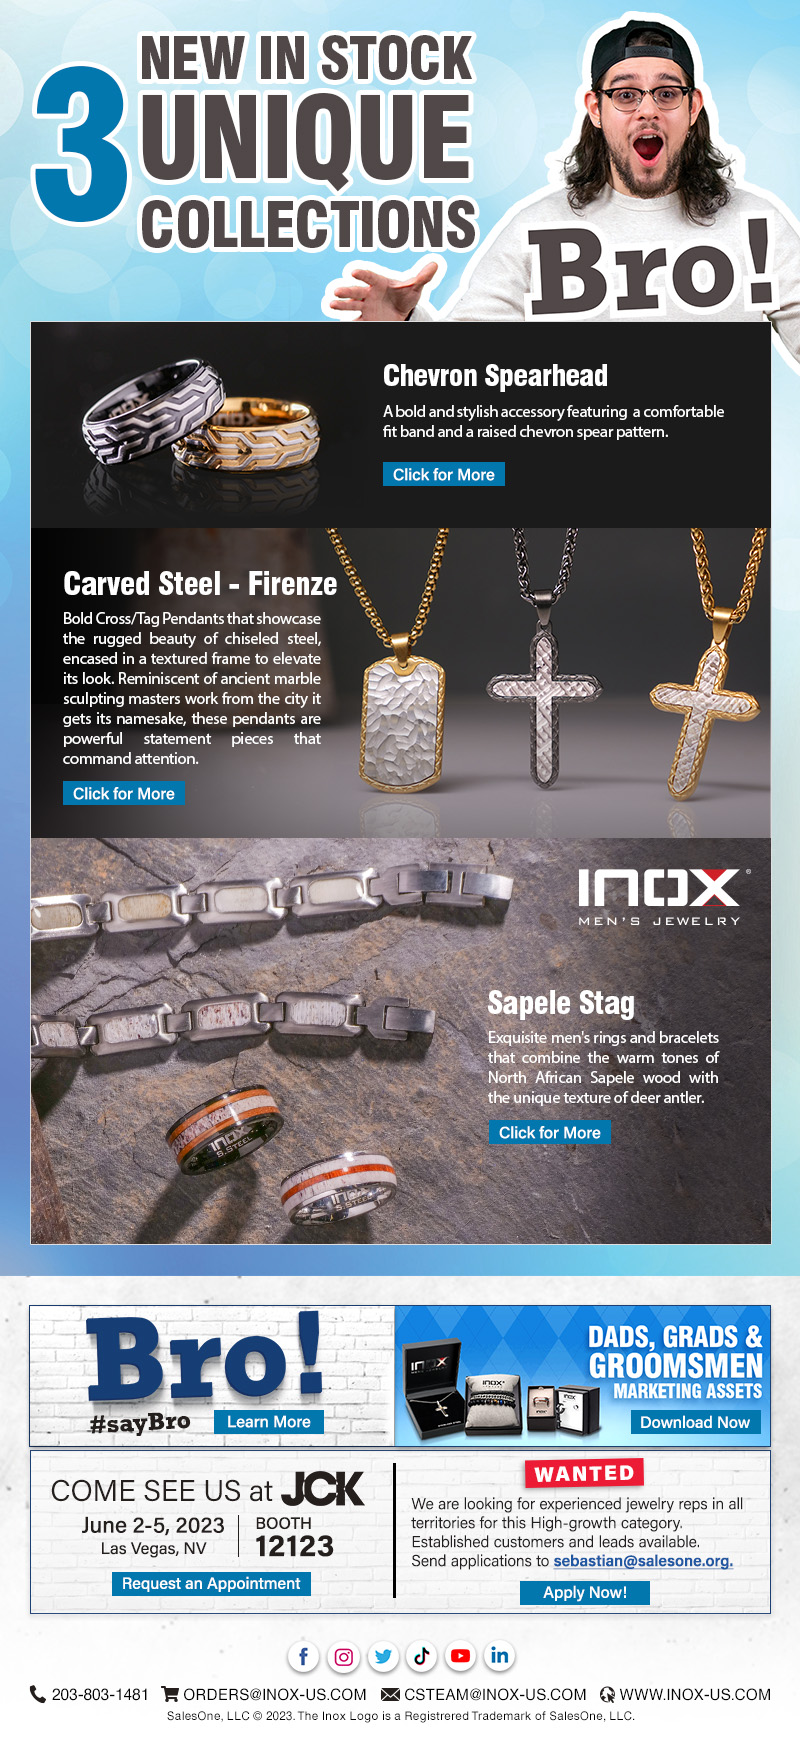 Bro! New Styles Alert: 3 Unique Collections from INOX